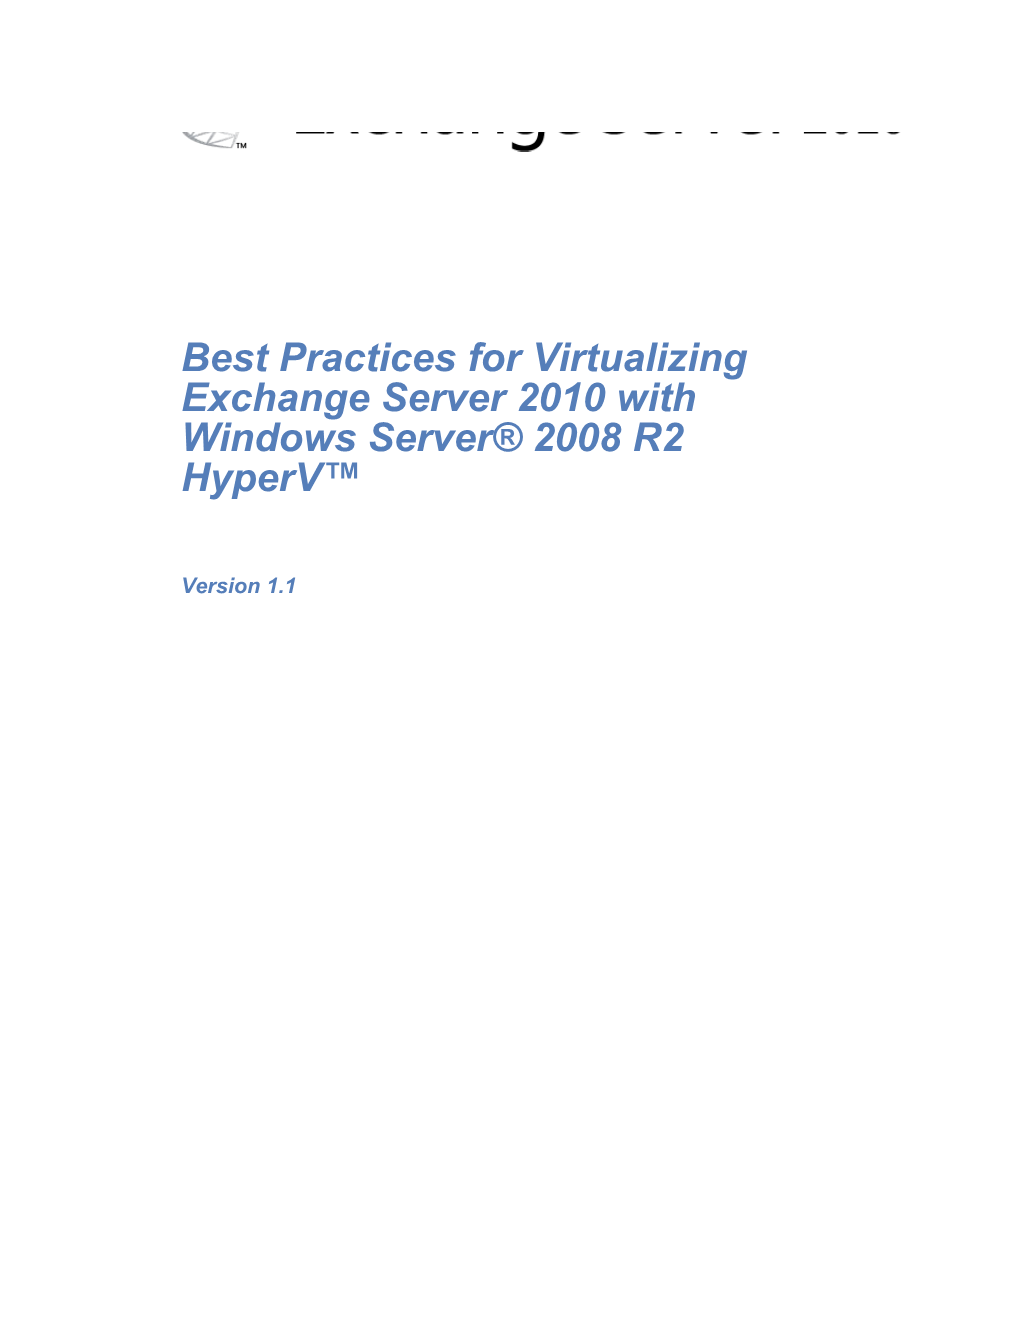 Best Practices for Virtualizing Exchange Server 2010 with Windows Server 2008 R2 Hyperv